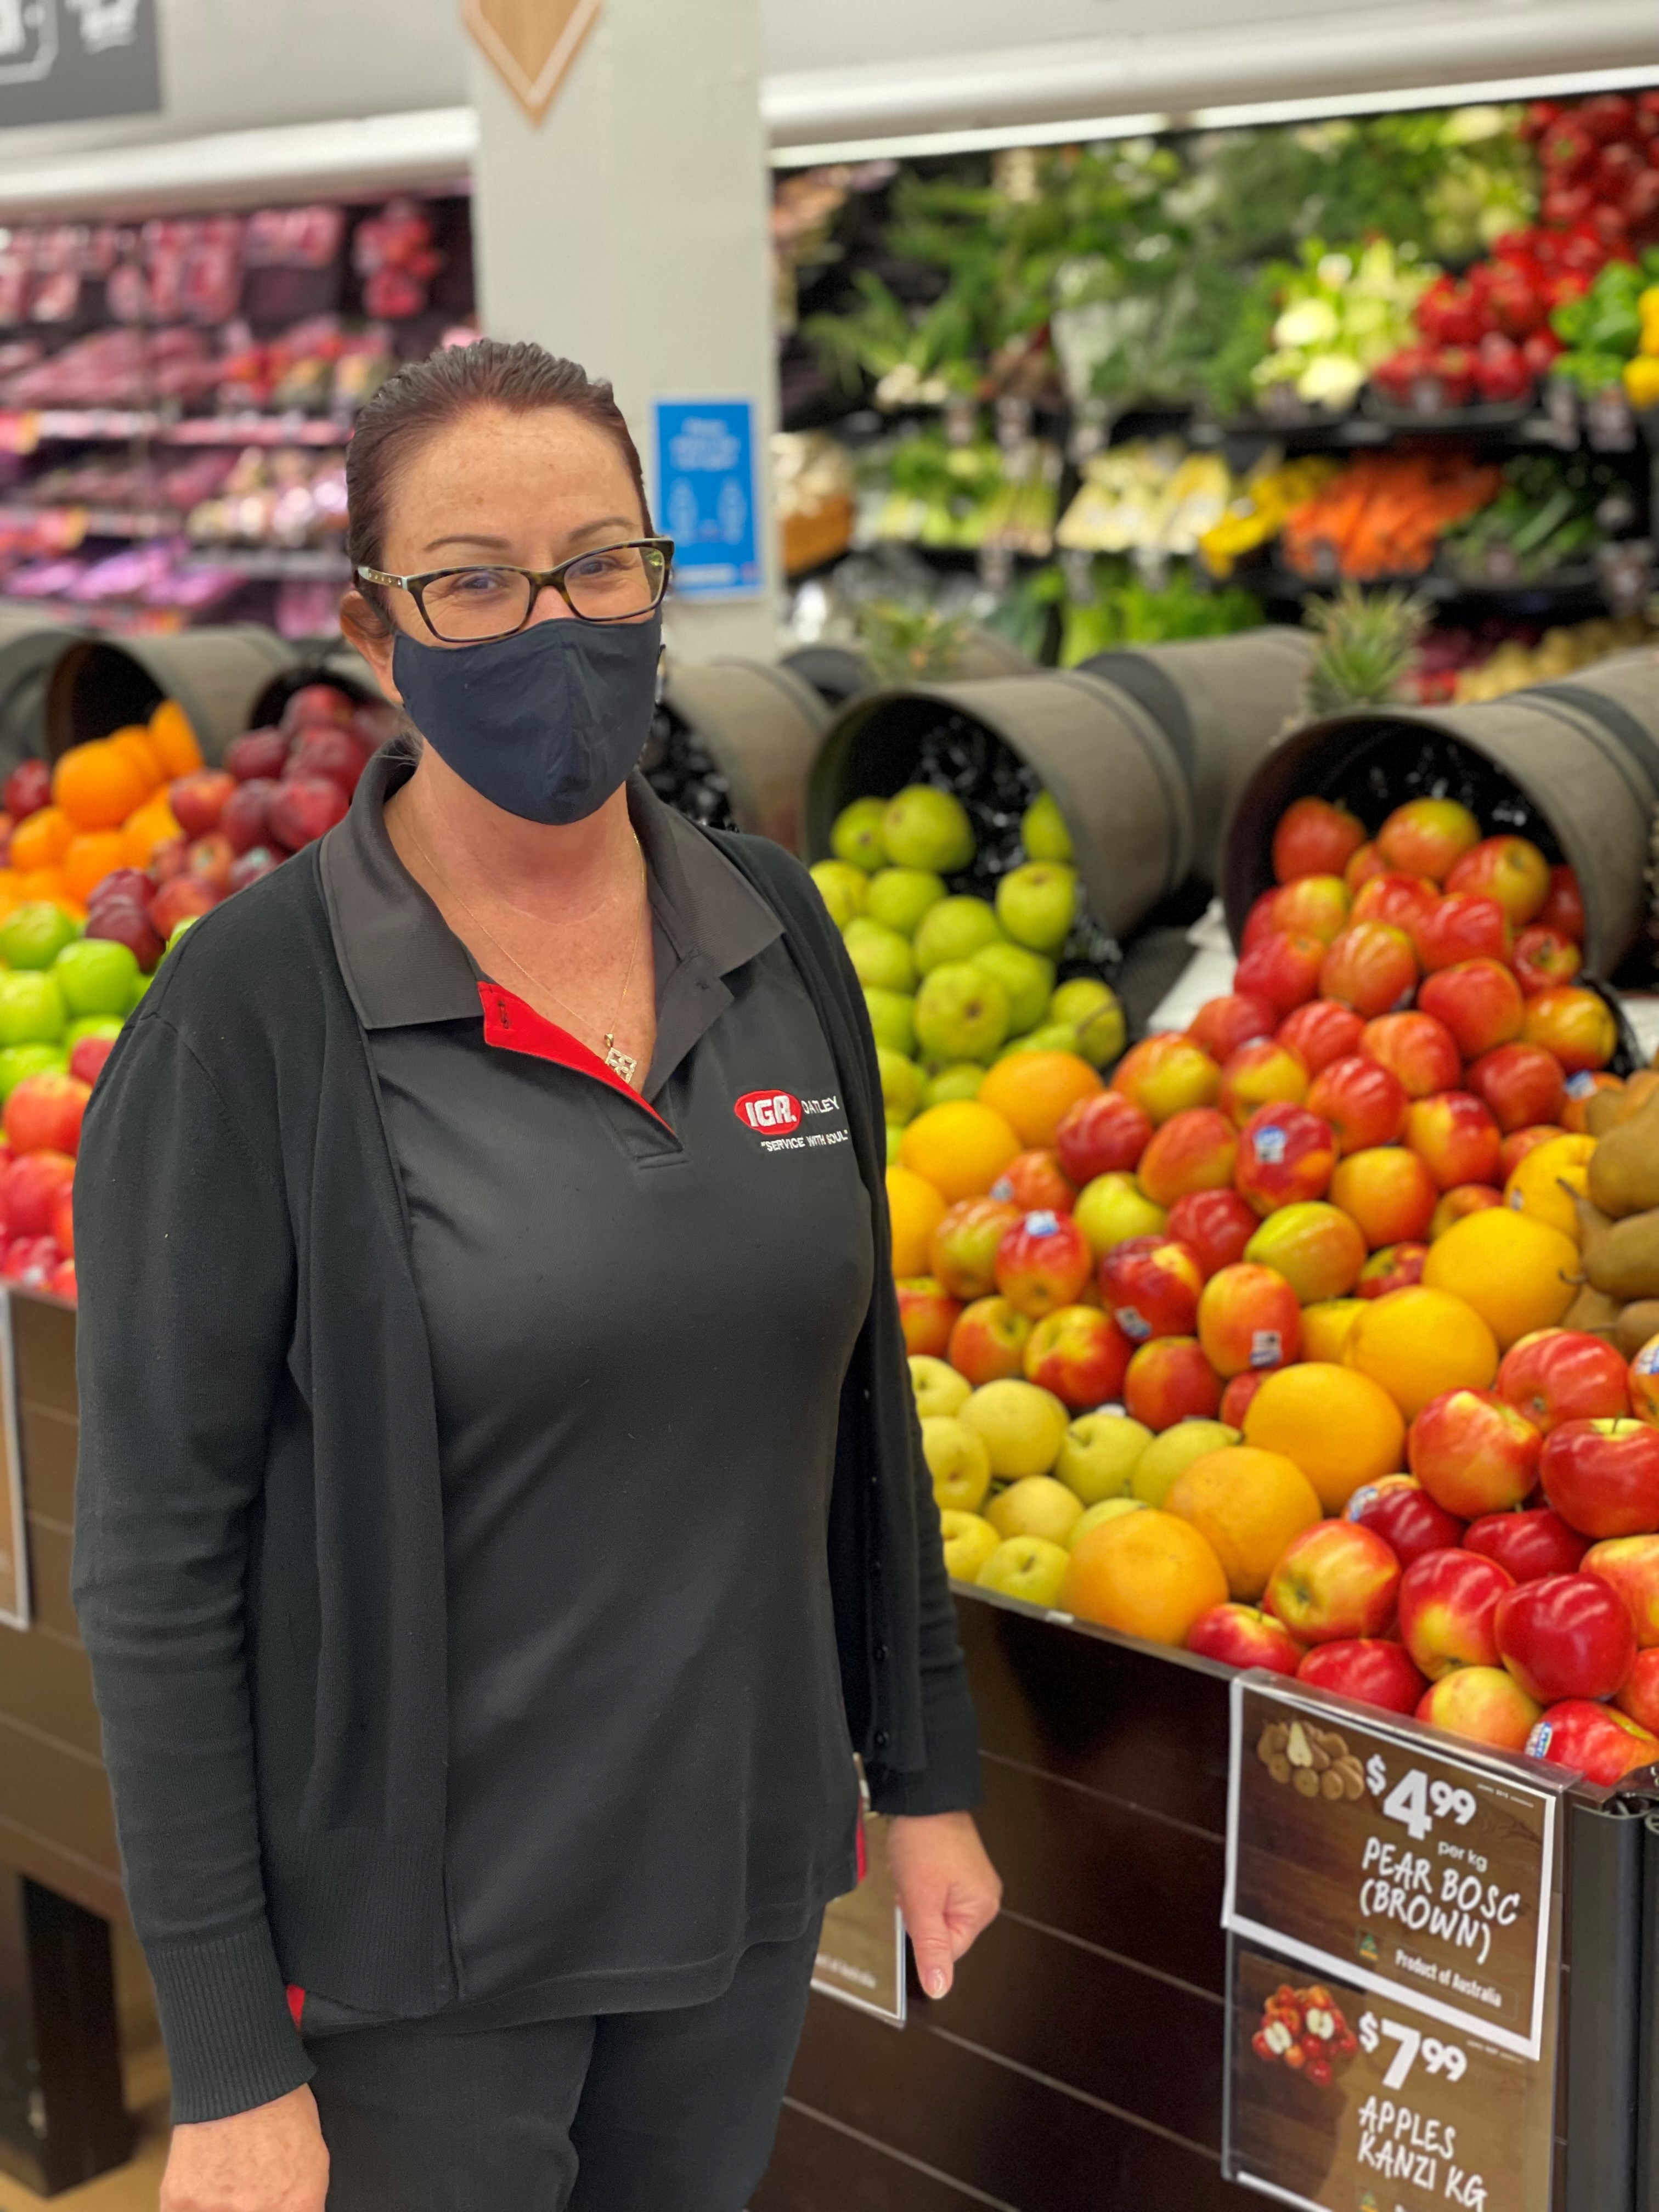 This is an image of Lisa Edwards at IGA Oatley.